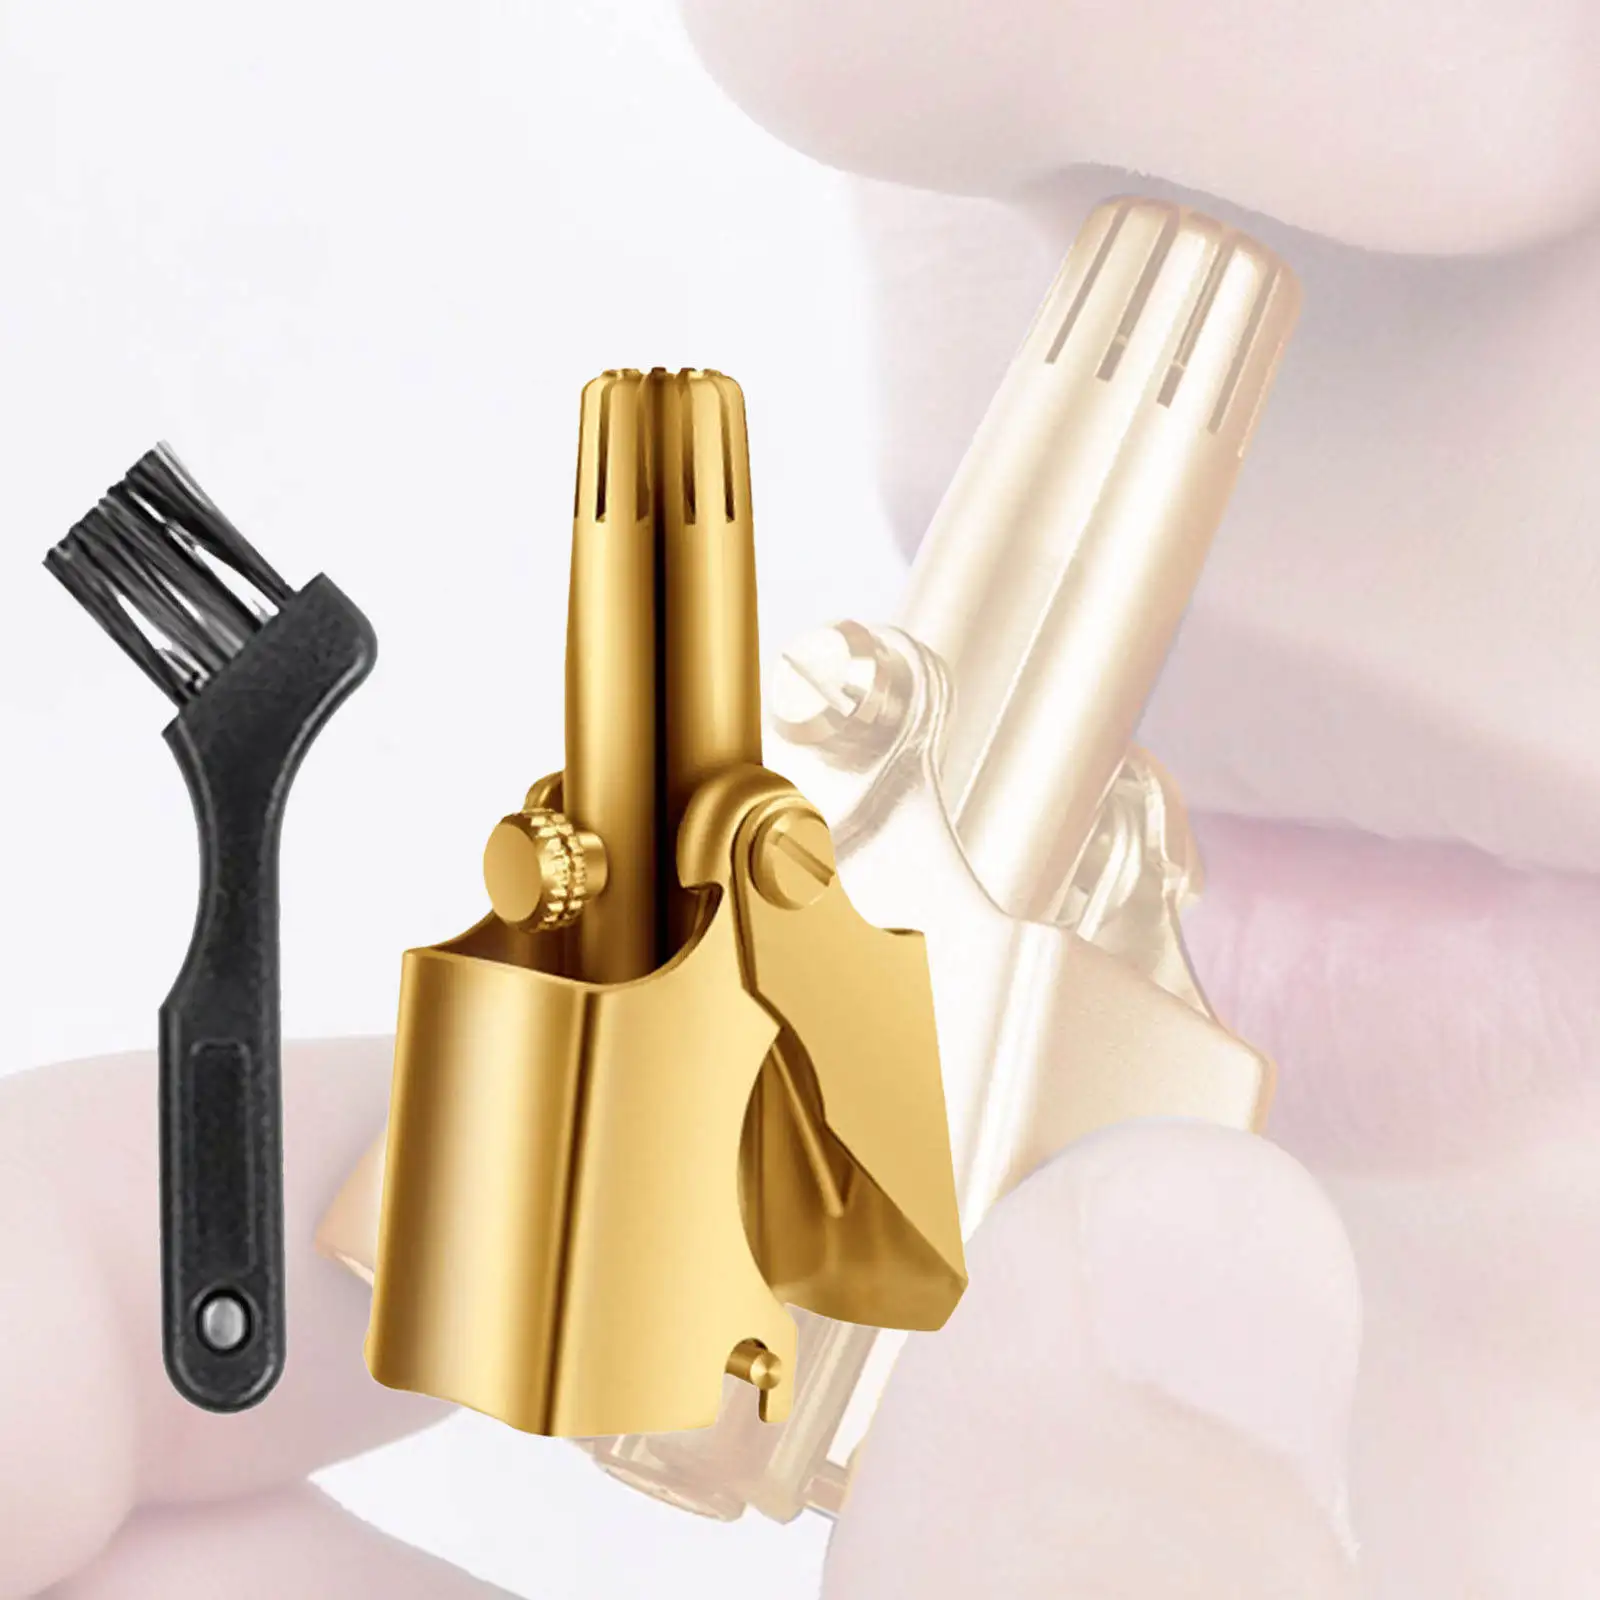 Ear and Nose Hair Trimmer Washable Removable No Batteries Clipper Removal Cleaner for Men Women